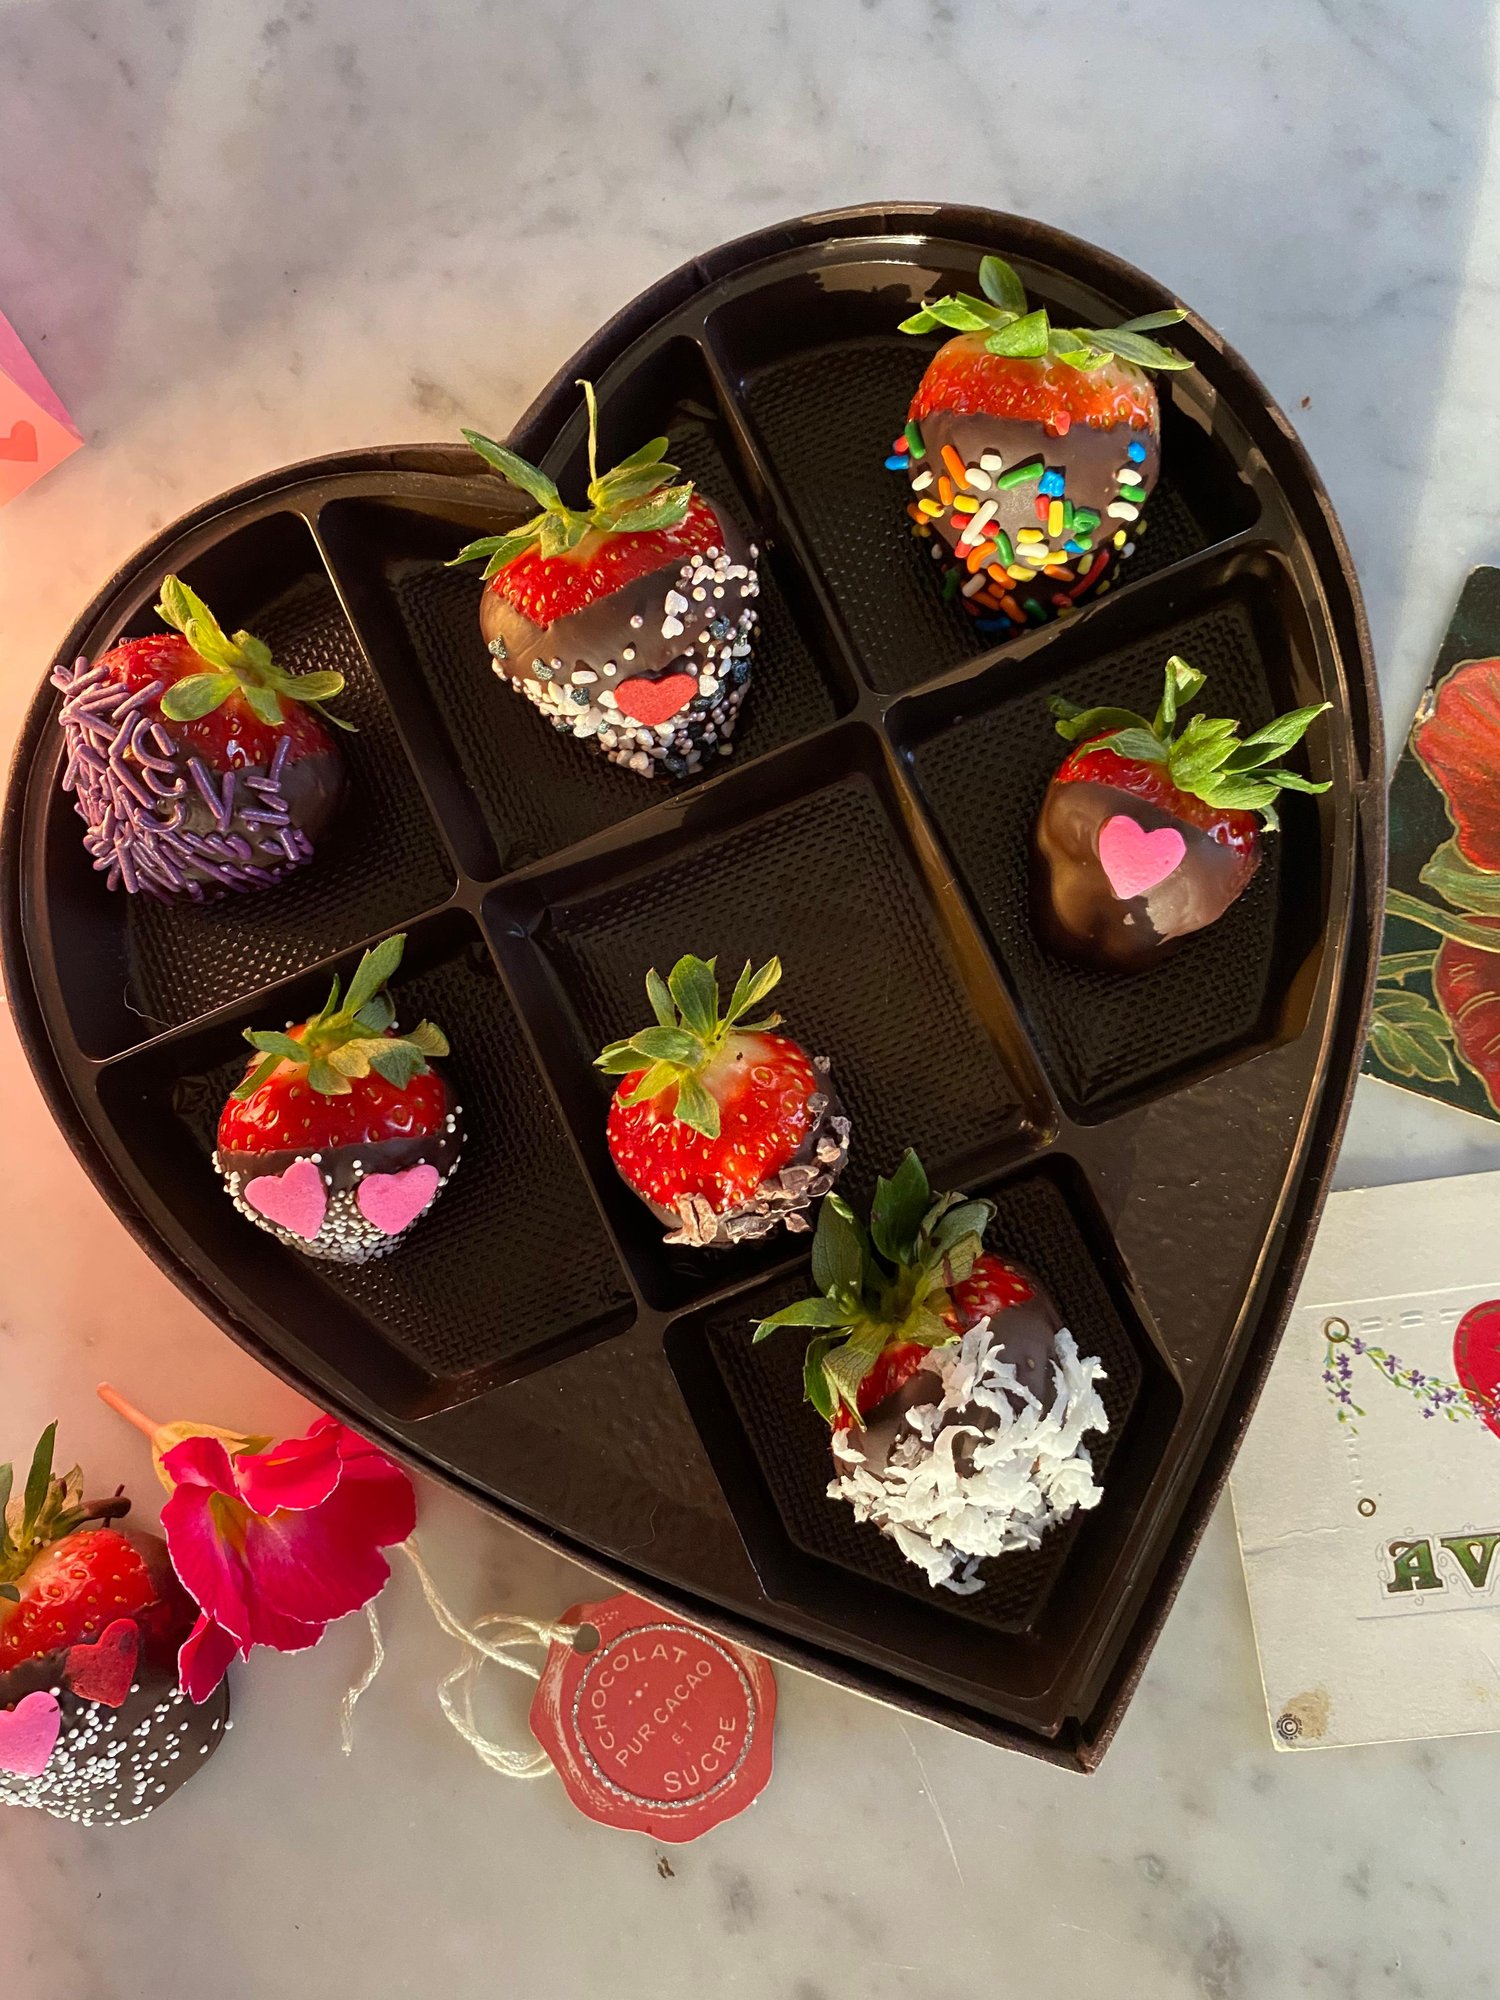 Chocolate-covered strawberries for Valentine